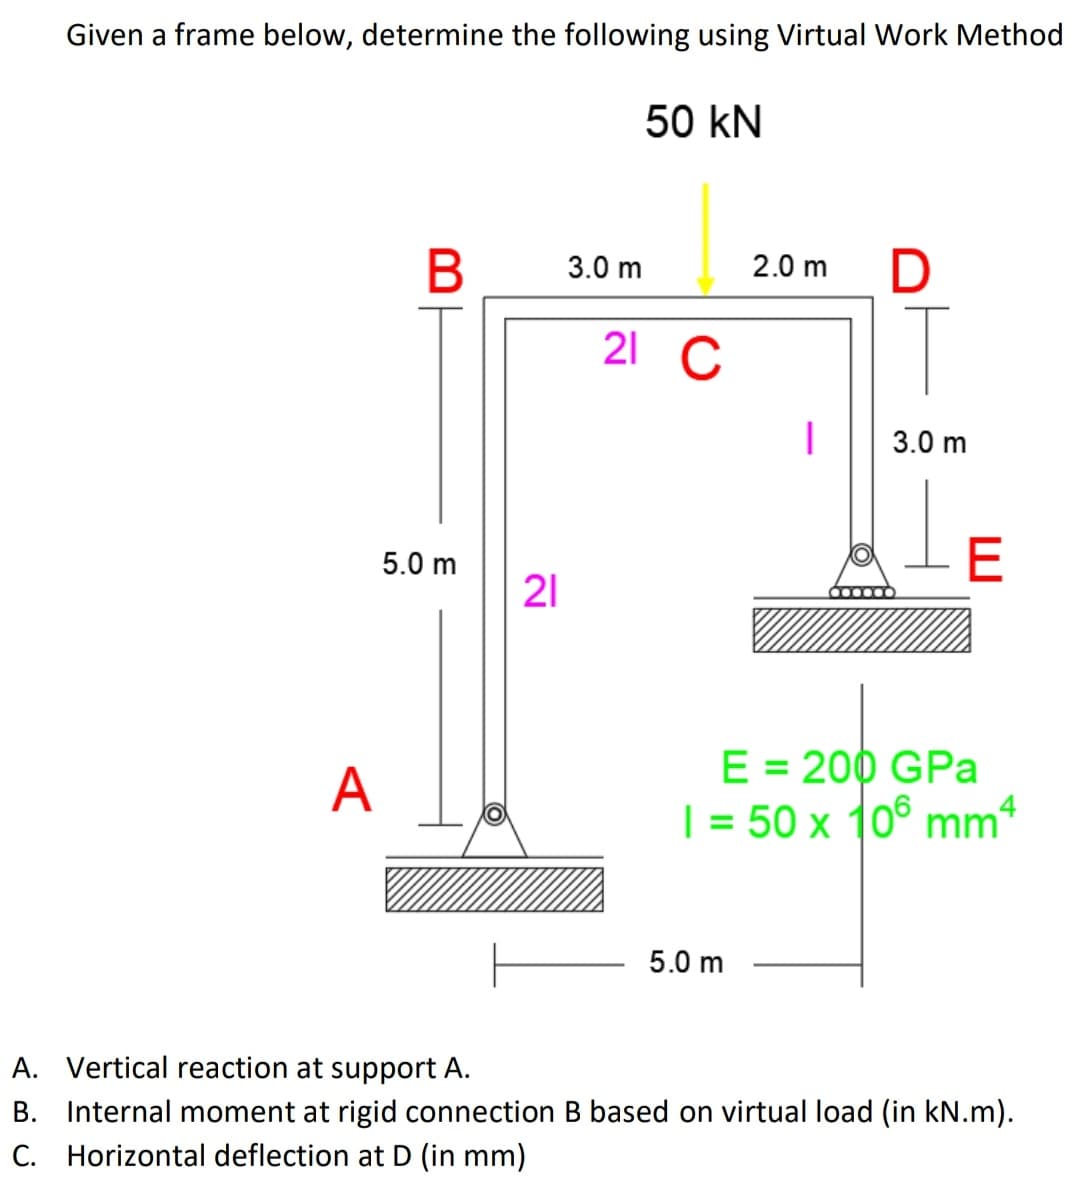 Given a frame below, determine the following using Virtual Work Method
50 kN
3.0 m
2.0 m
21 C
3.0 m
E
5.0 m
21
E = 200 GPa
| = 50 x 10° mm*
A
5.0 m
A. Vertical reaction at support A.
B. Internal moment at rigid connection B based on virtual load (in kN.m).
C. Horizontal deflection at D (in mm)
